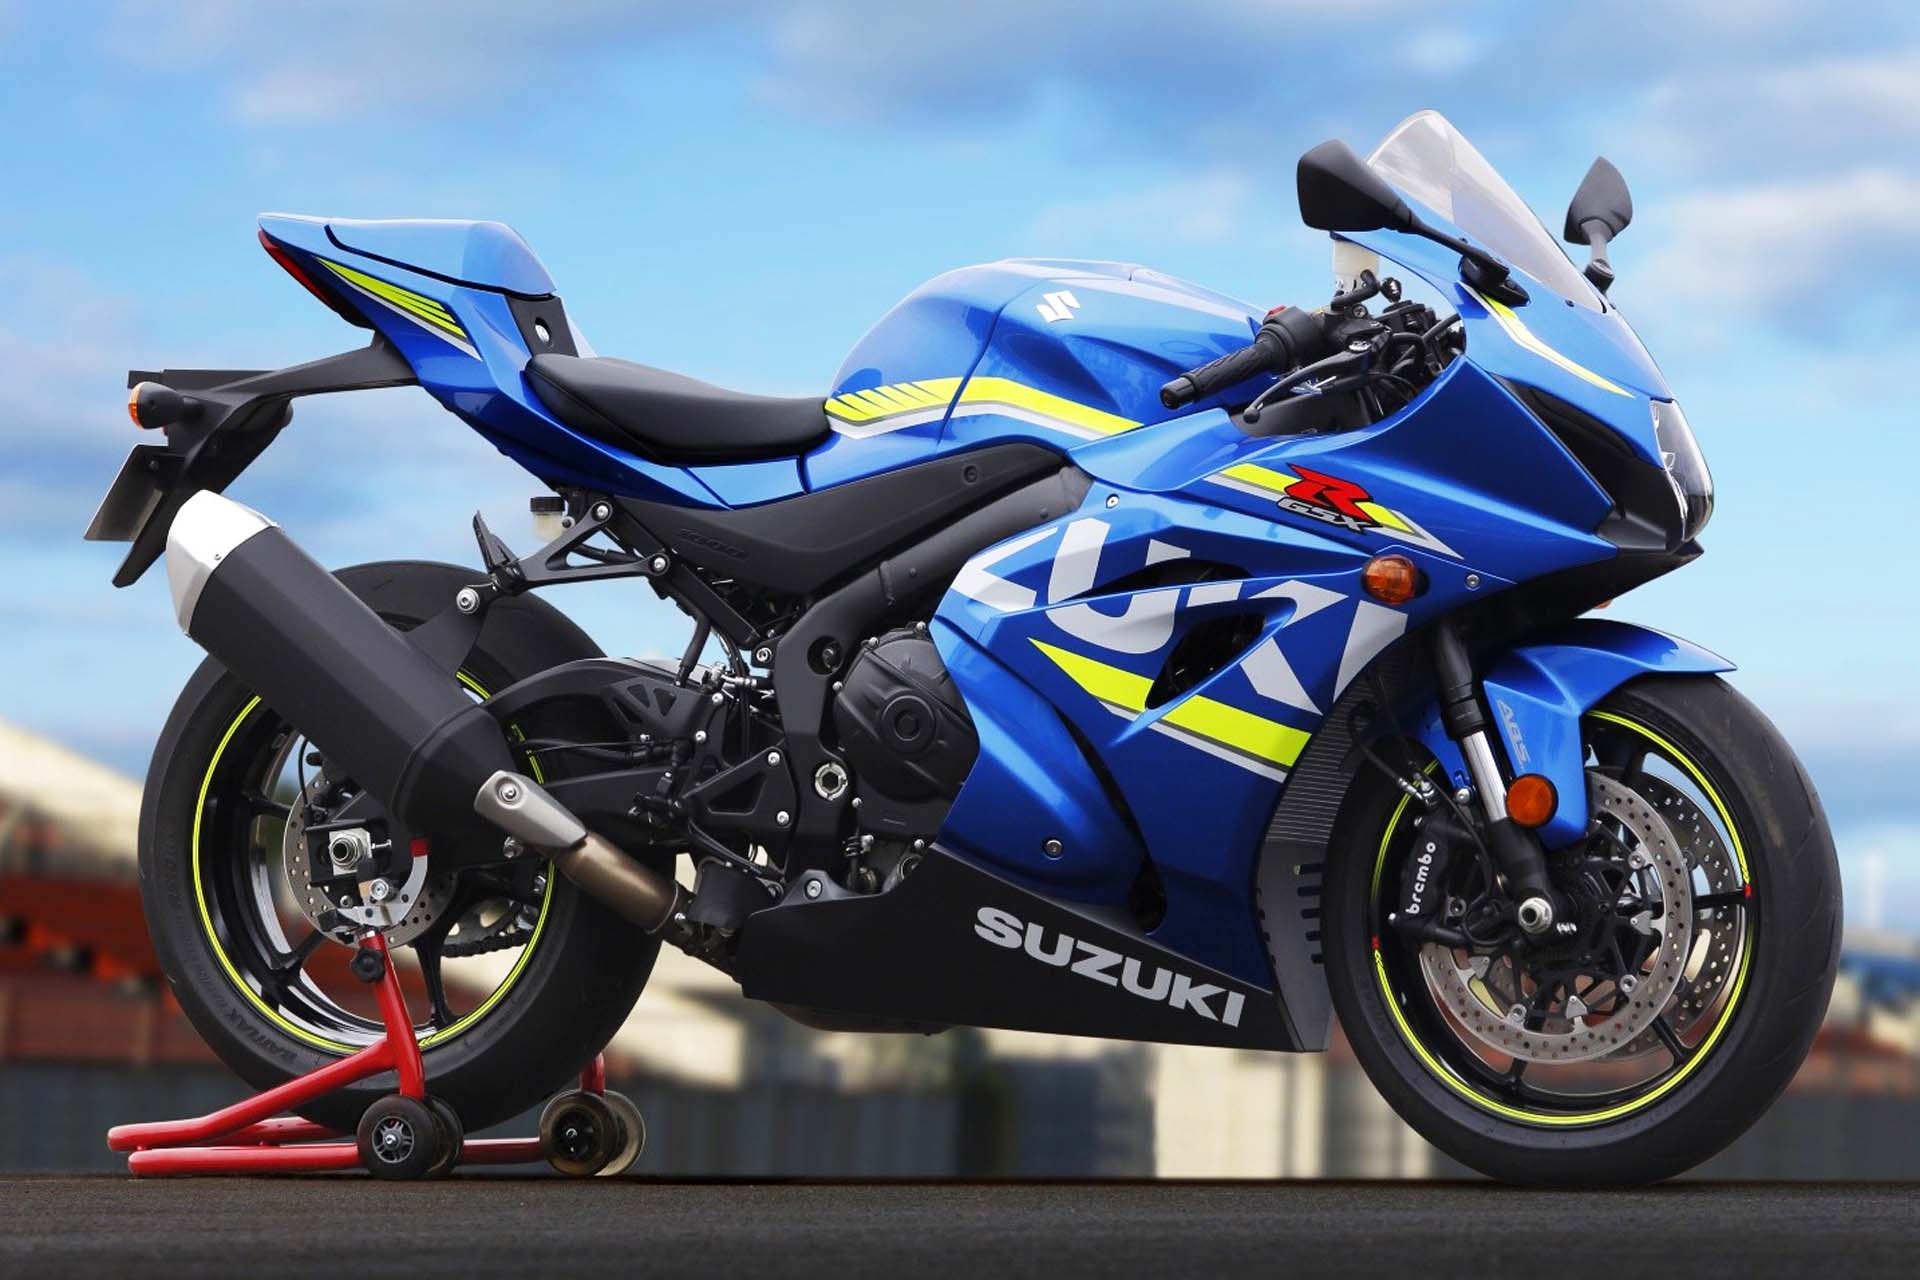 Suzuki’s iconic GSX-R1000 gets a big upgrade late in 2016 for the 2017 model year. The newest iteration will have a variable valve timing-equipped 999cc engine good for around 200 hp, with a ten-stage traction control system. However, it won’t have an inertia measurement unit <em>a la</em> the Yamaha YZF-R1 or the Ducati 1299 Panigale, which means a less electronics-heavy riding experience. Showa Balance Free Forks with a remote damping valve and similarly setup rear shock should improve ride comfort at low speed and grip at high speed.